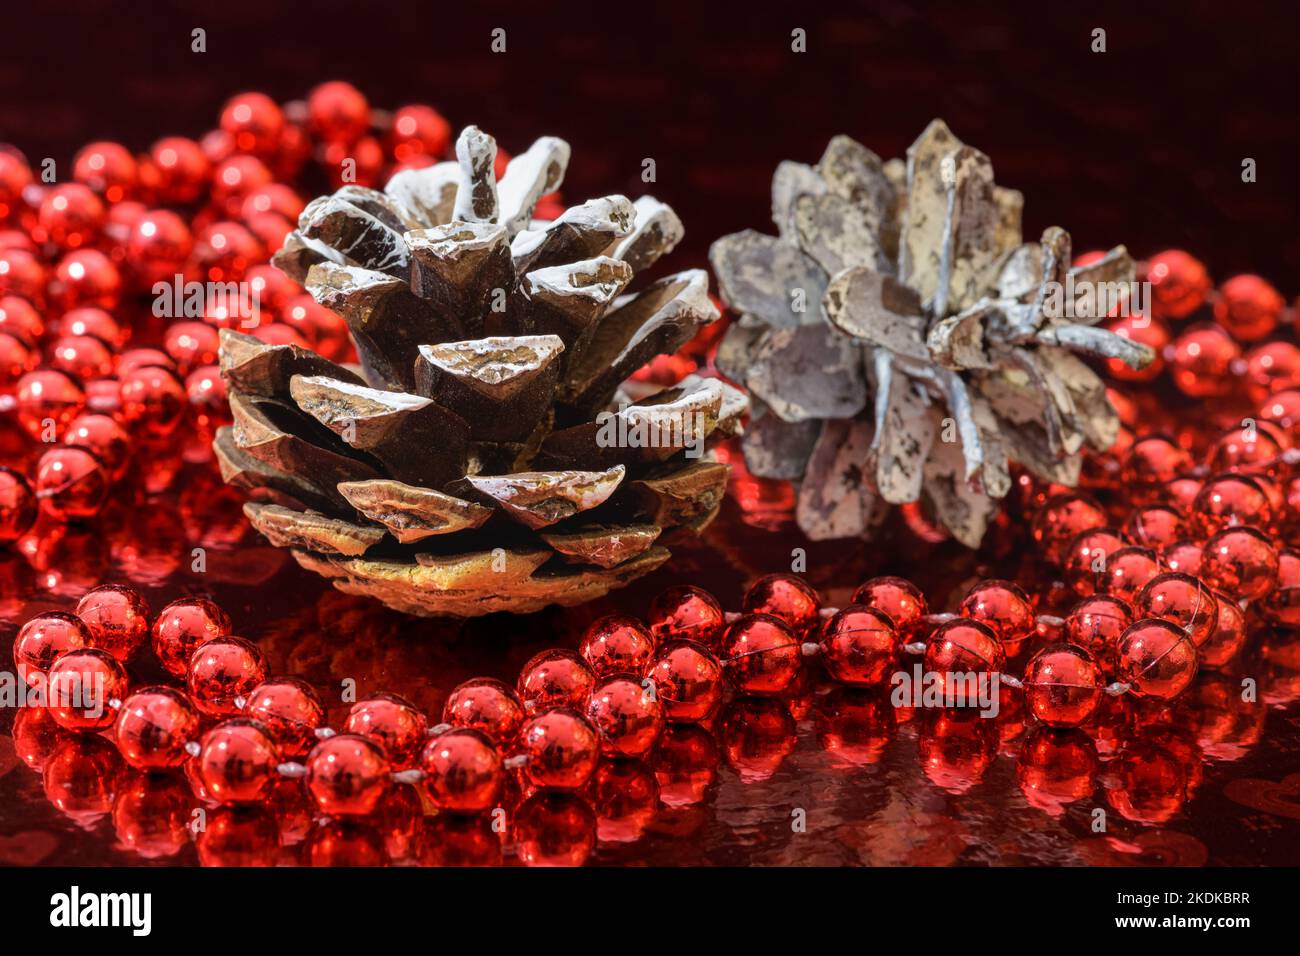 Christmas decoration with two pine cones and a red beaded garland on a red shiny background. Stock Photo